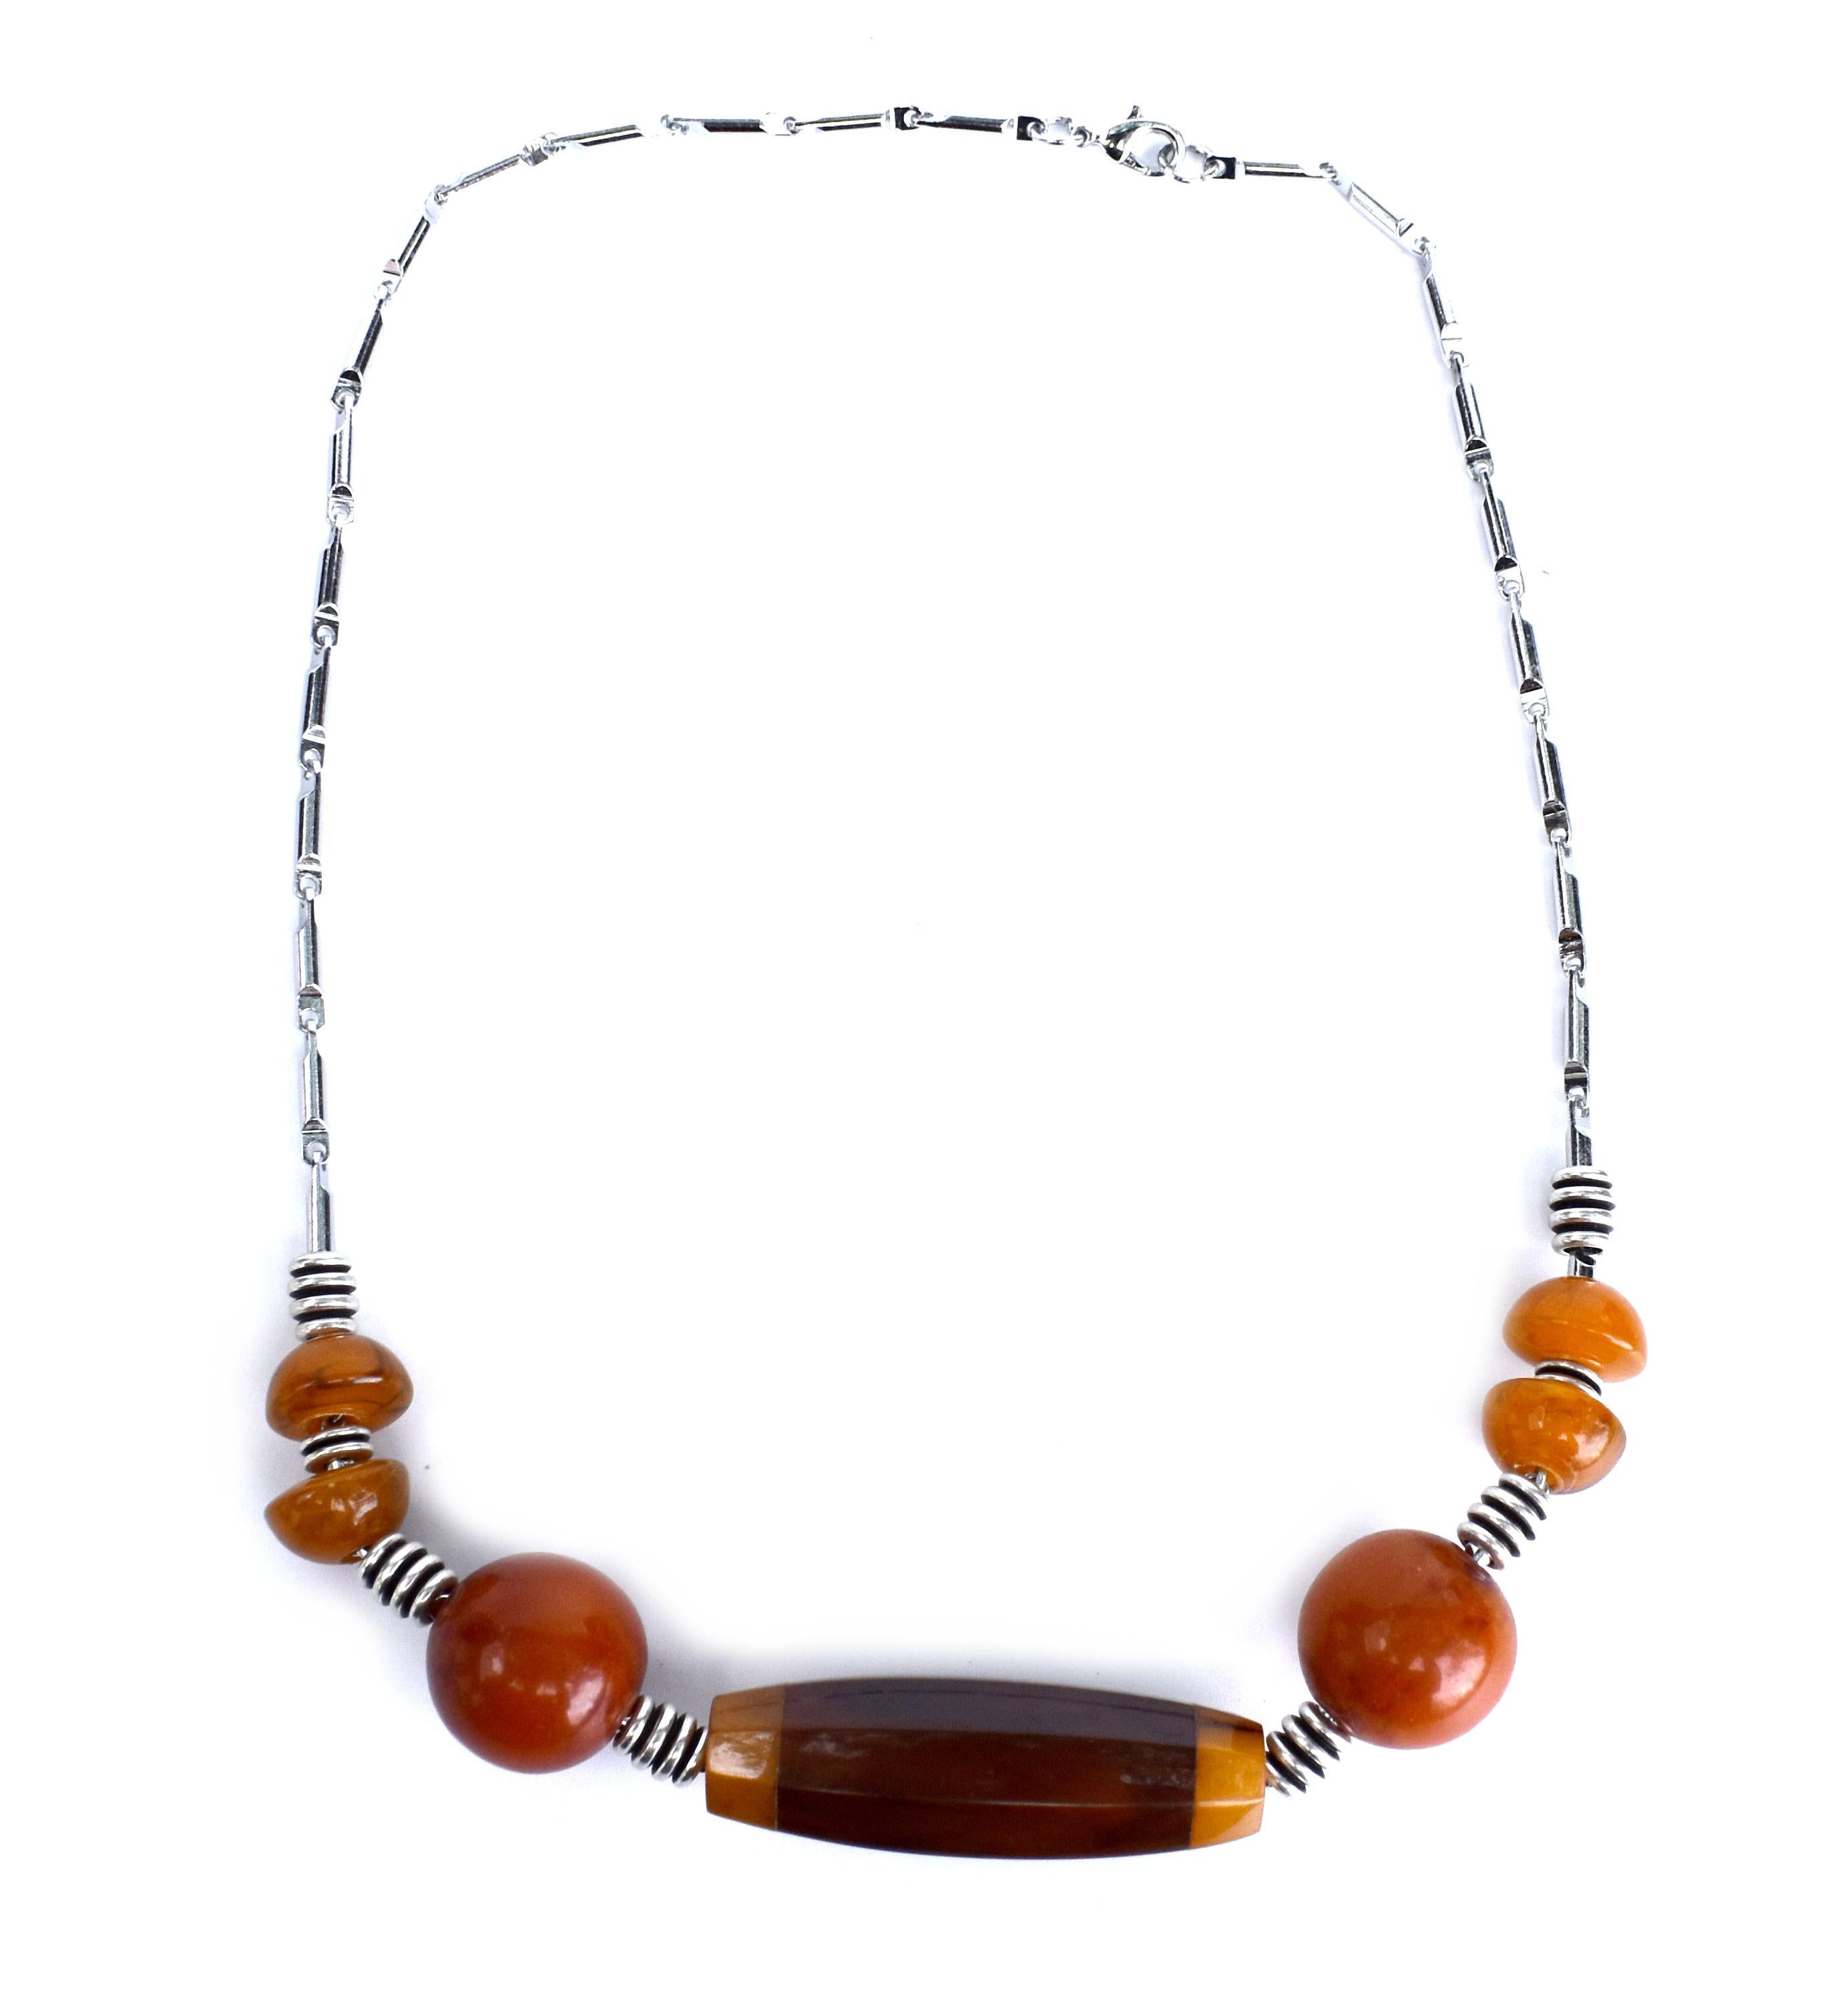 Art Deco Bakelite and Chrome Necklace, C1930 For Sale 2